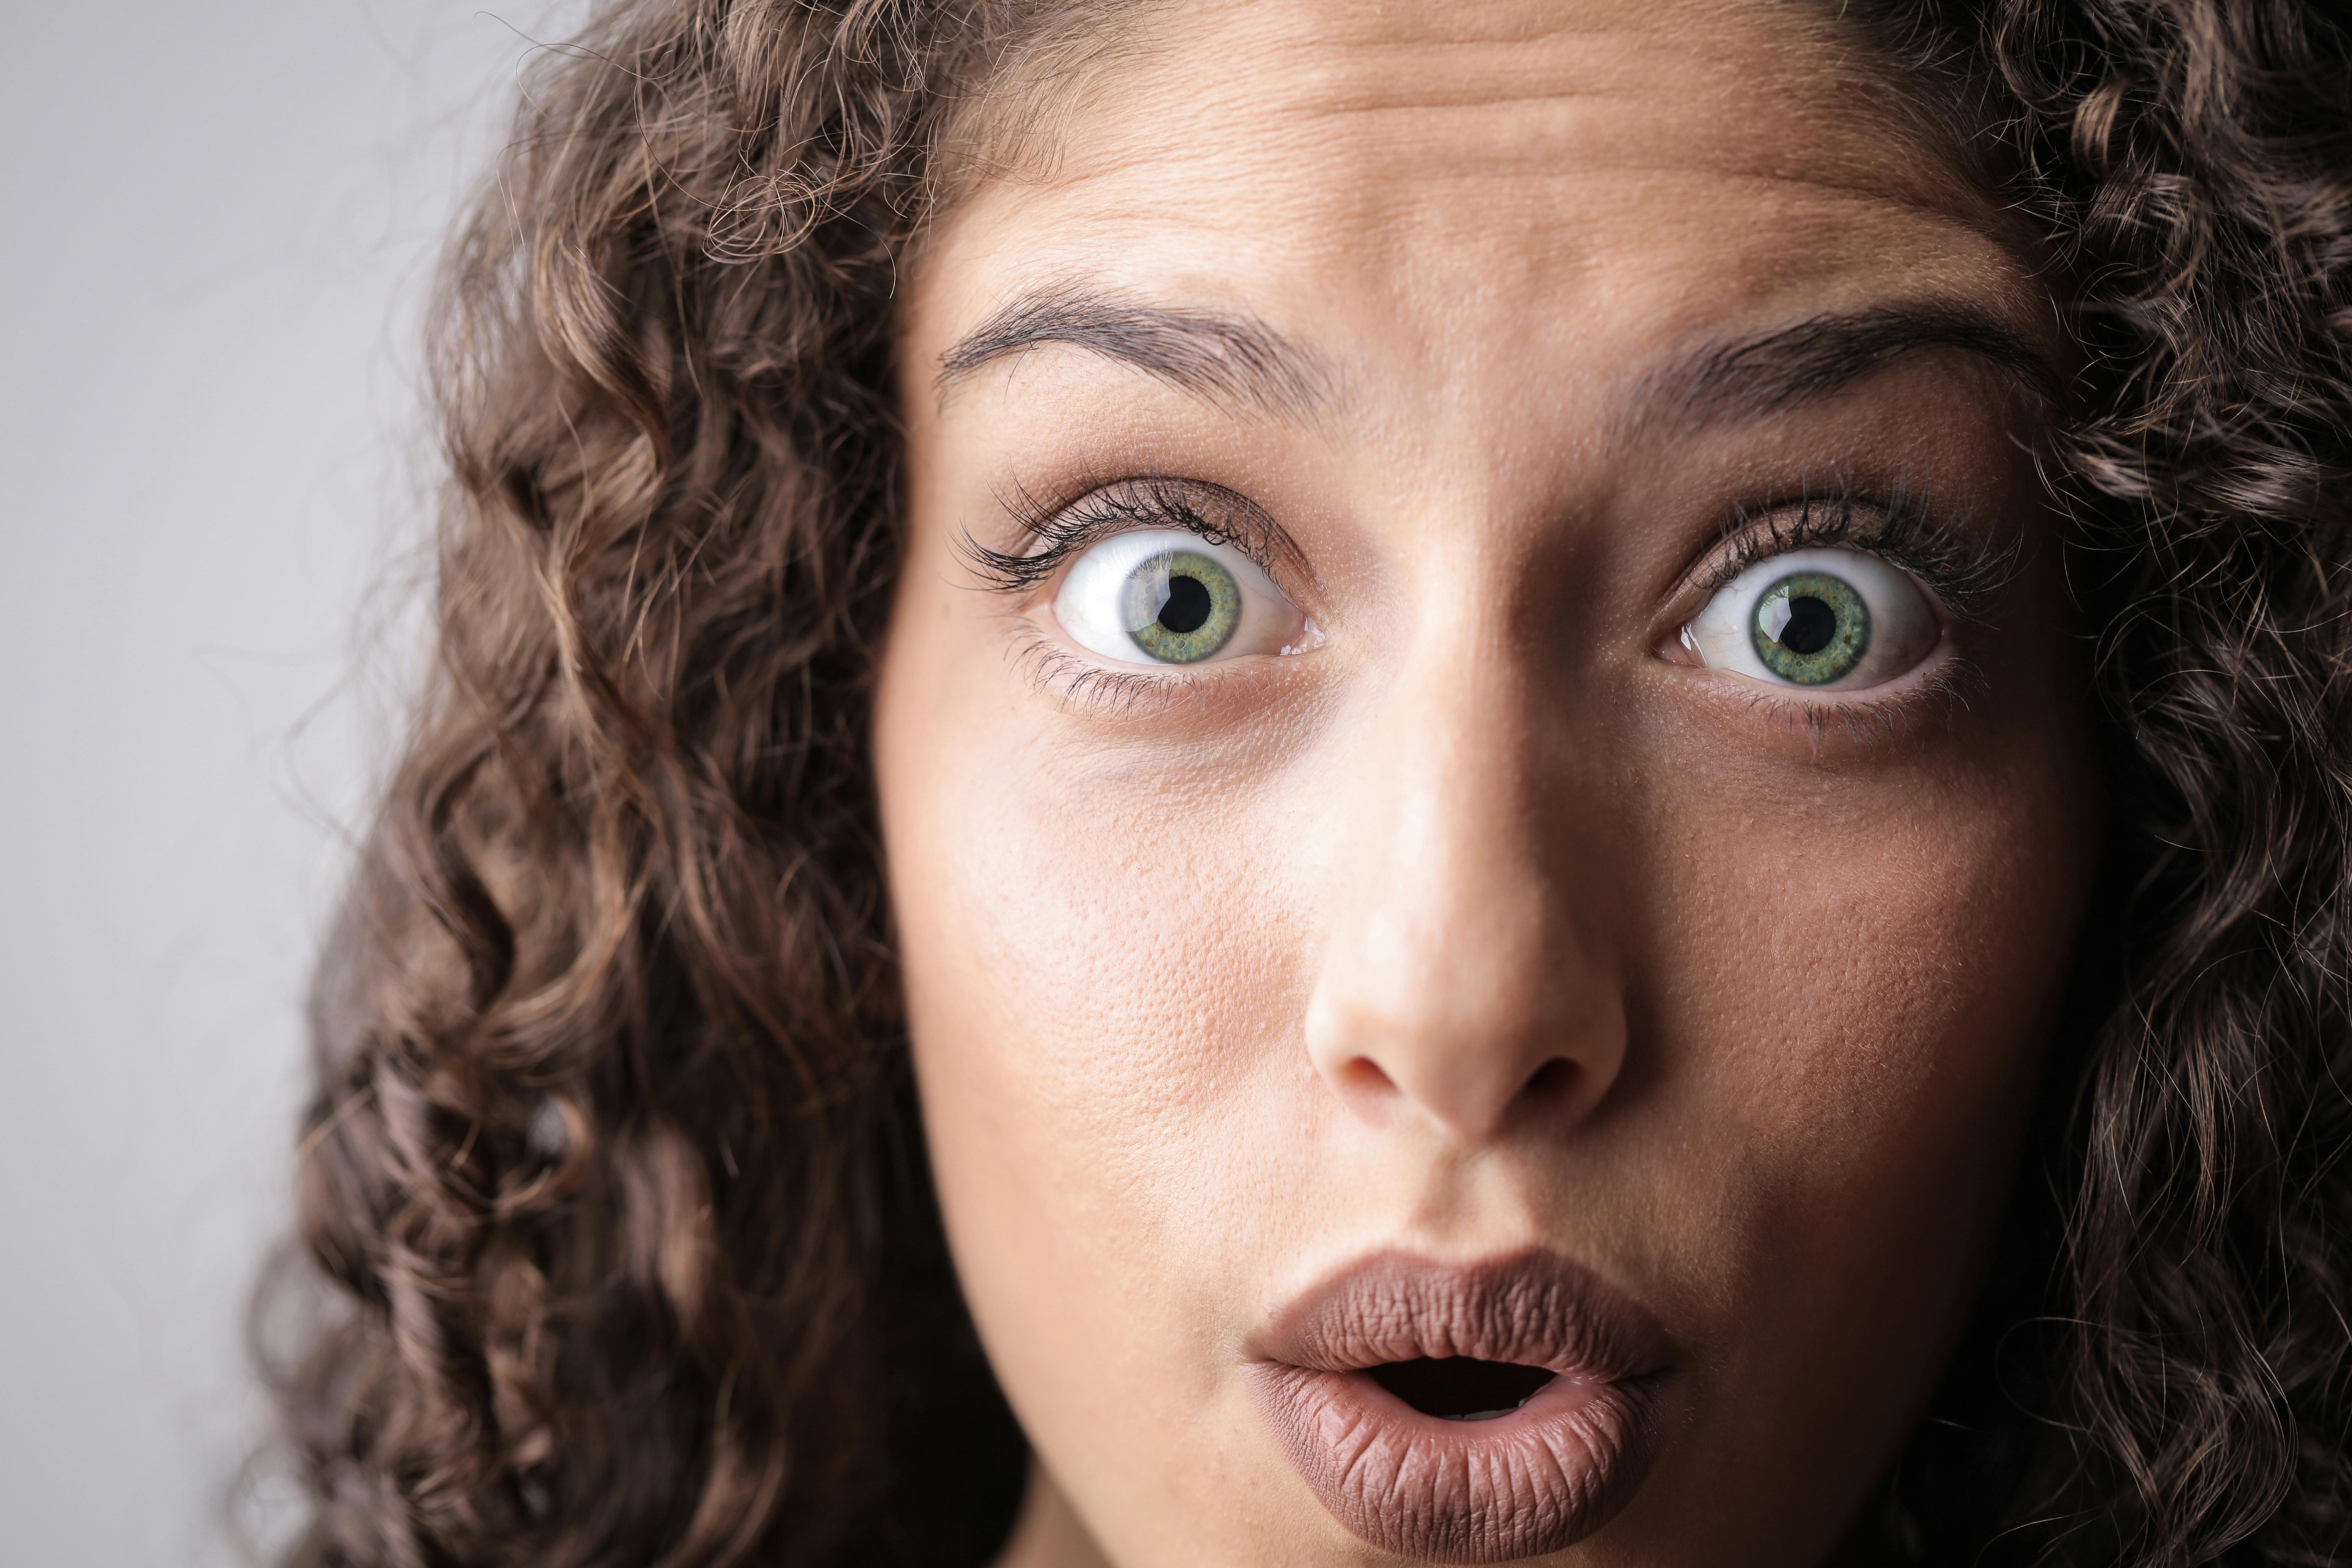 Shocked woman with green eyes | Source: Pexels